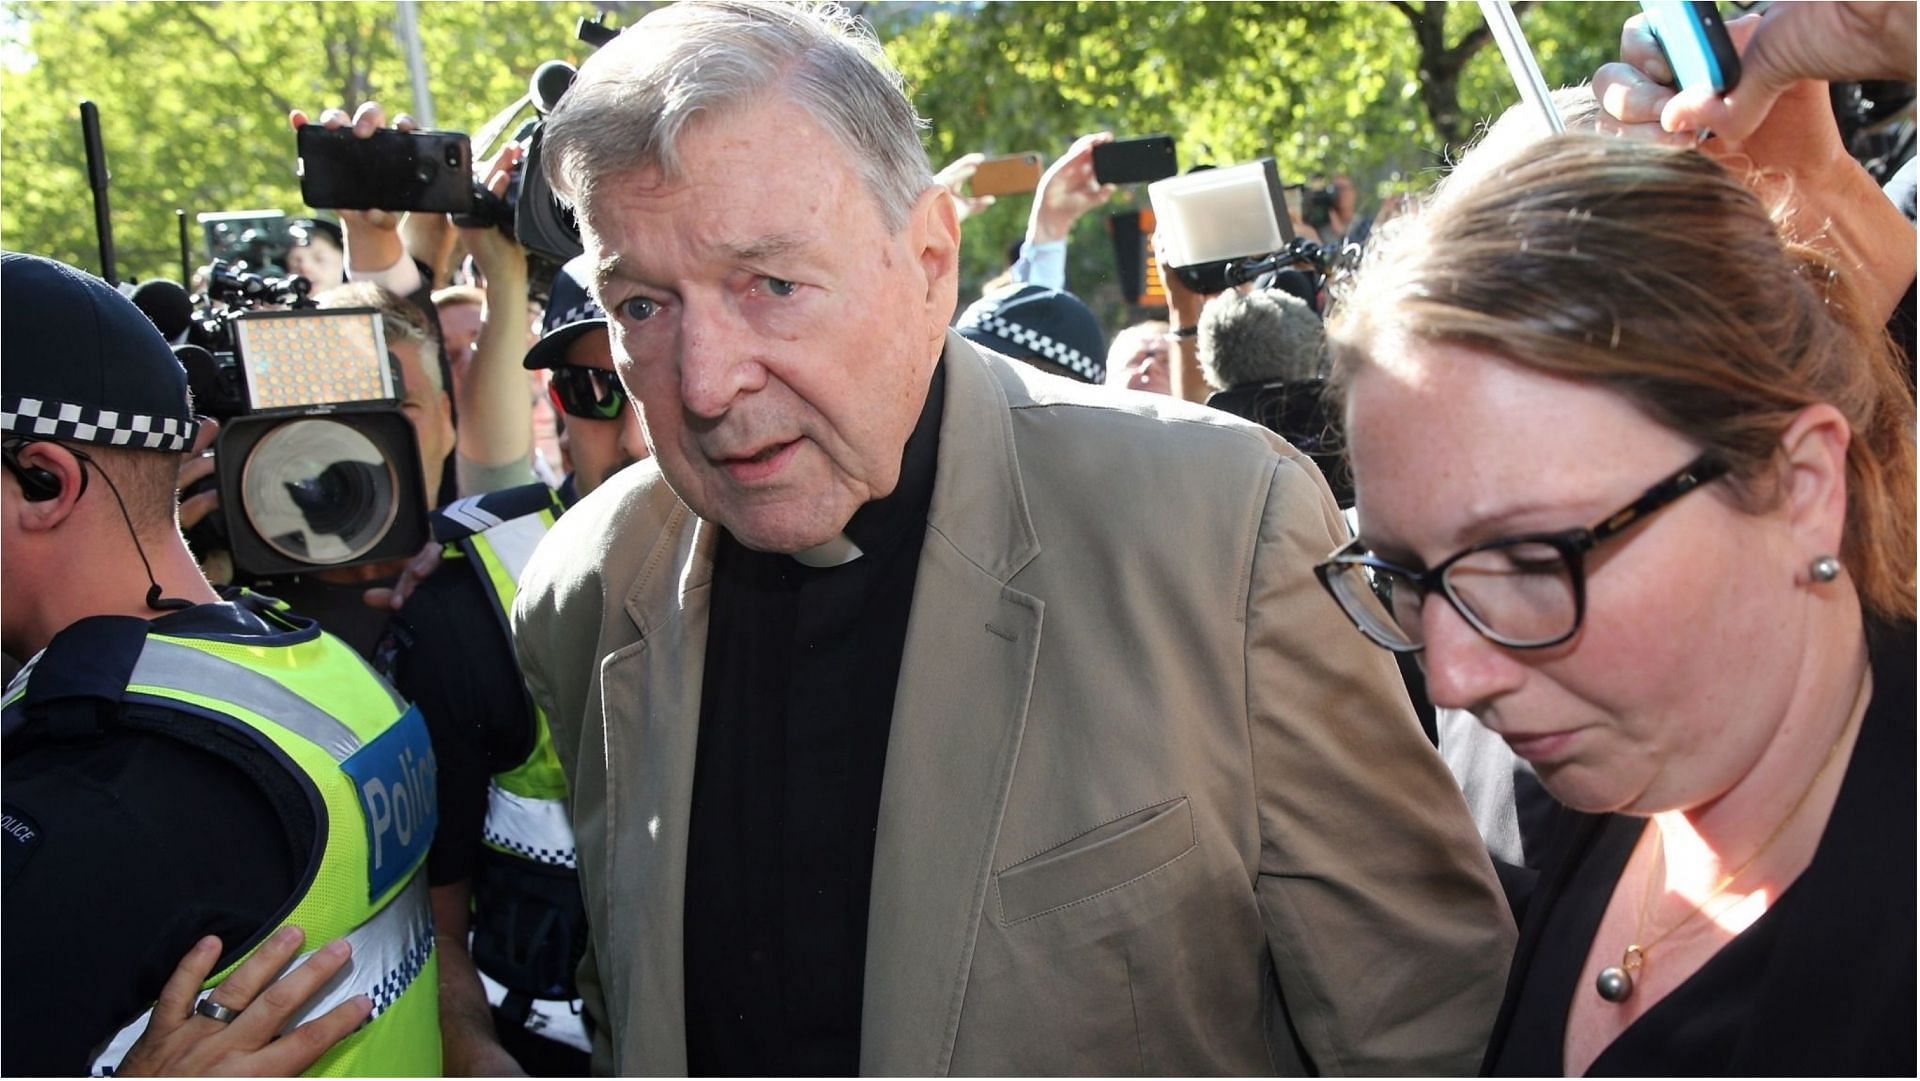 George Pell was a priest at various places (Image via Con Chronis/Getty Images)